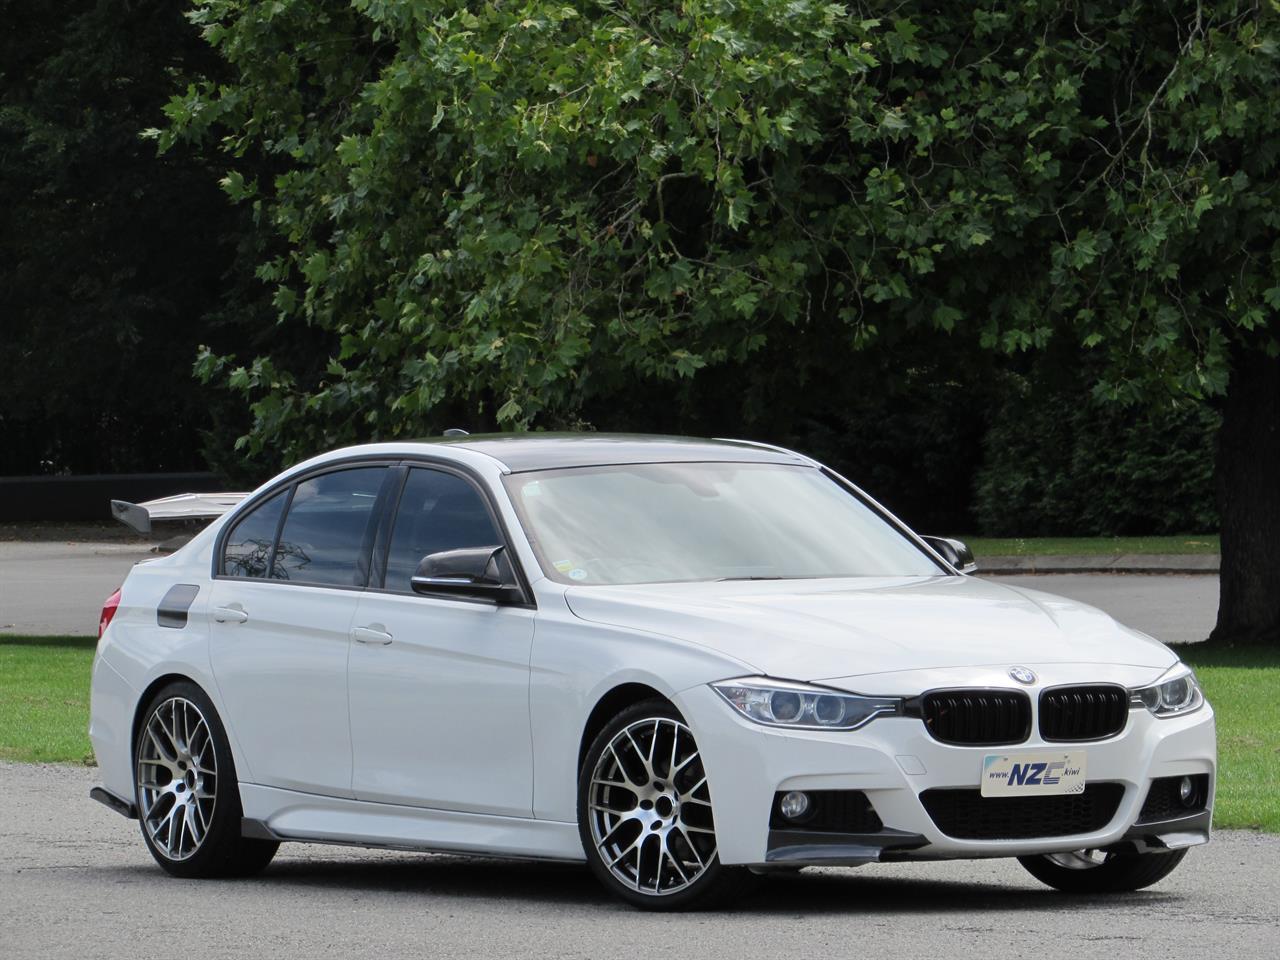 NZC best hot price for 2013 BMW 320d in Christchurch